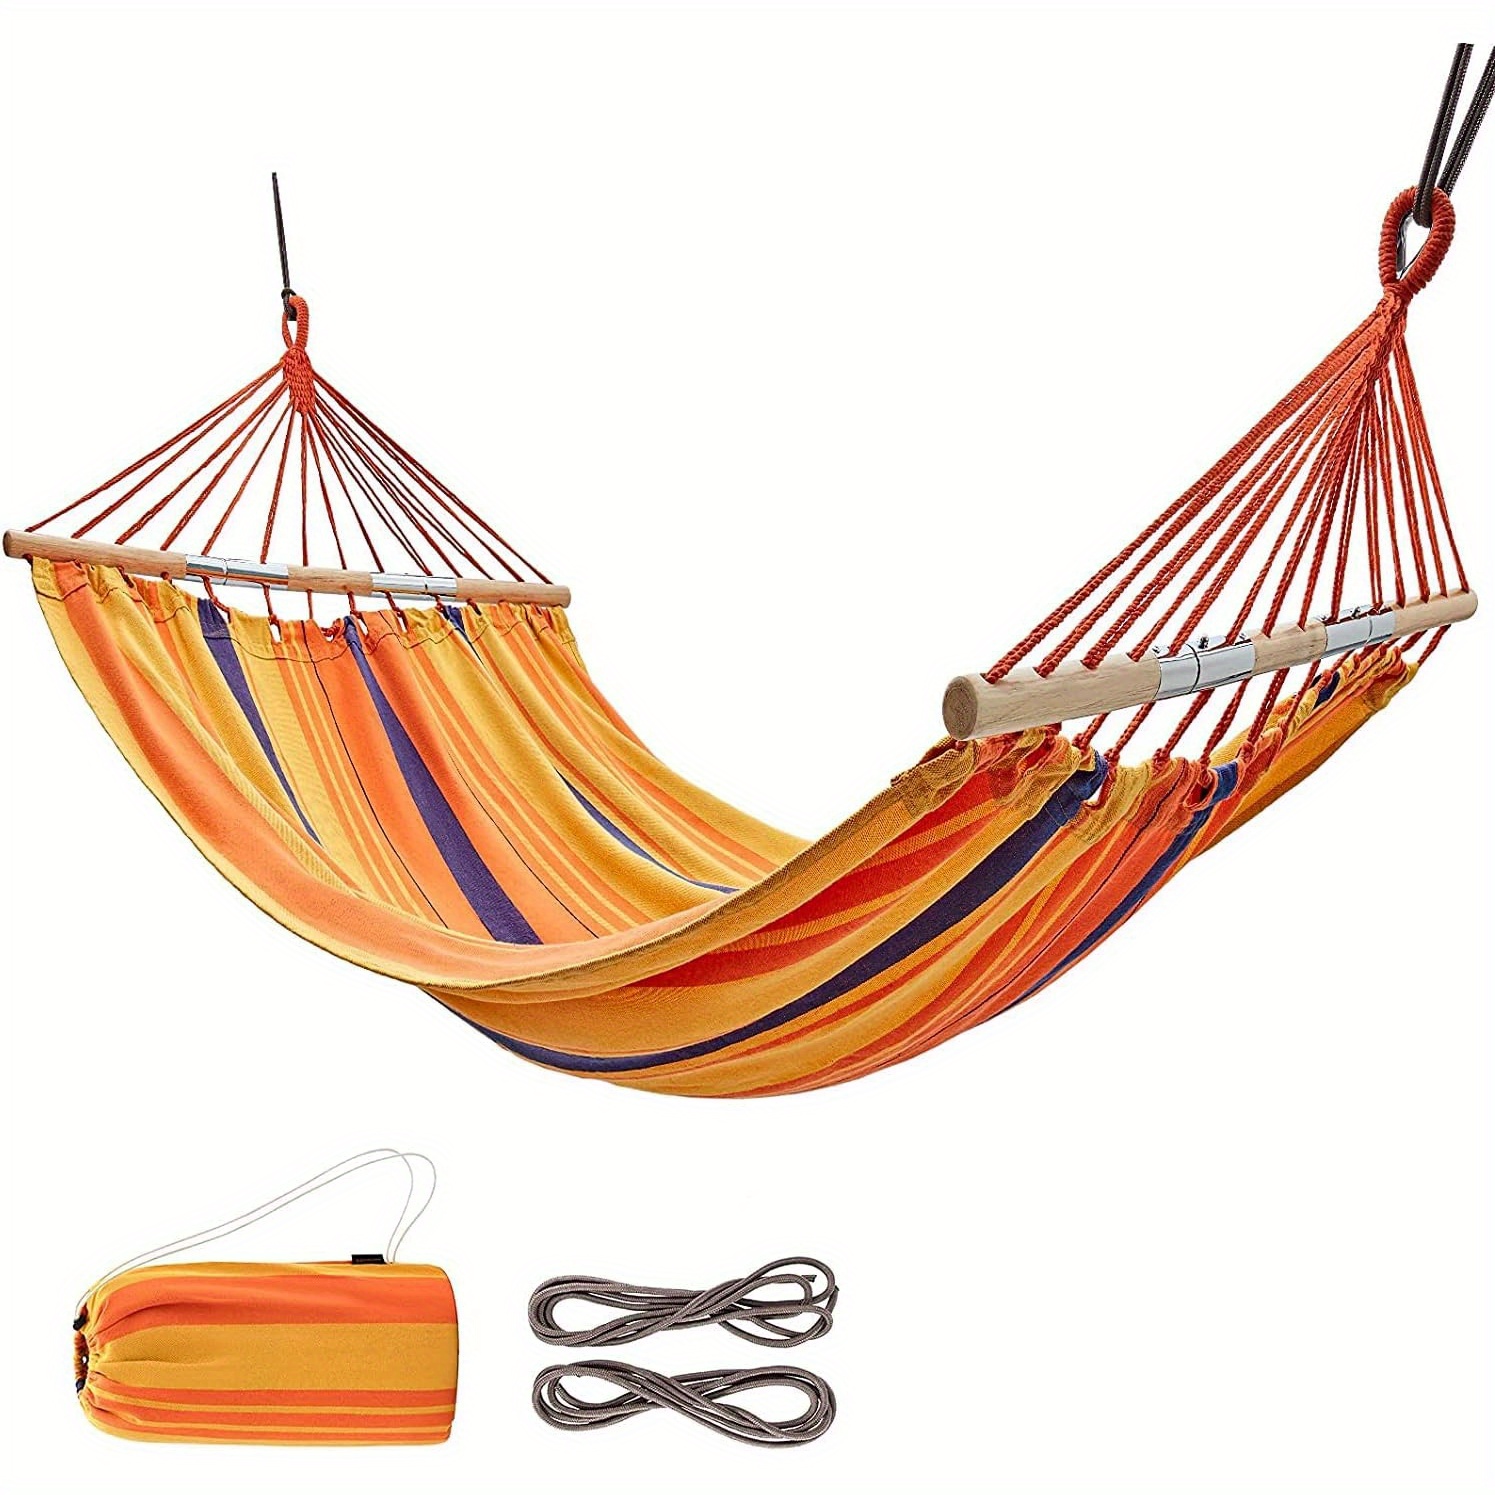 

Kingcamp Portable Hammock, 2-person Cotton Hammock With Foldable Bamboo Boom, Tree Hammock Suitable For Outdoor/indoor Camping, Backyard, Beach, Can Bear 400 Pounds